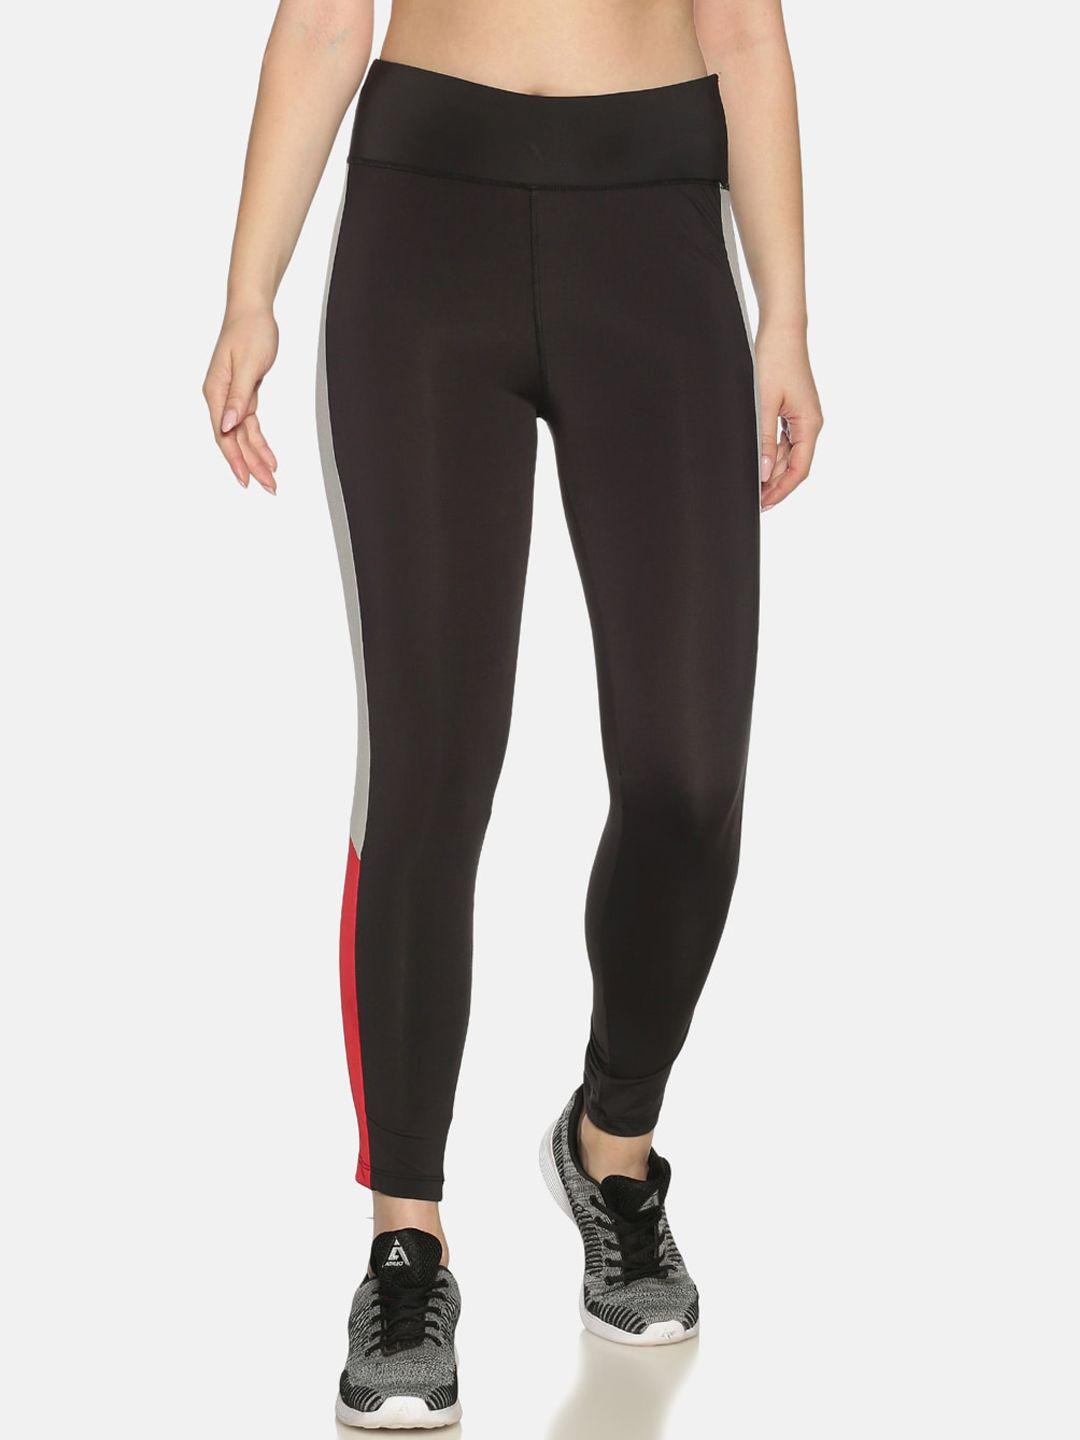 campus-sutra-women-black-&-grey-colourblocked-sports-dry-fit-tights-with-side-stripe